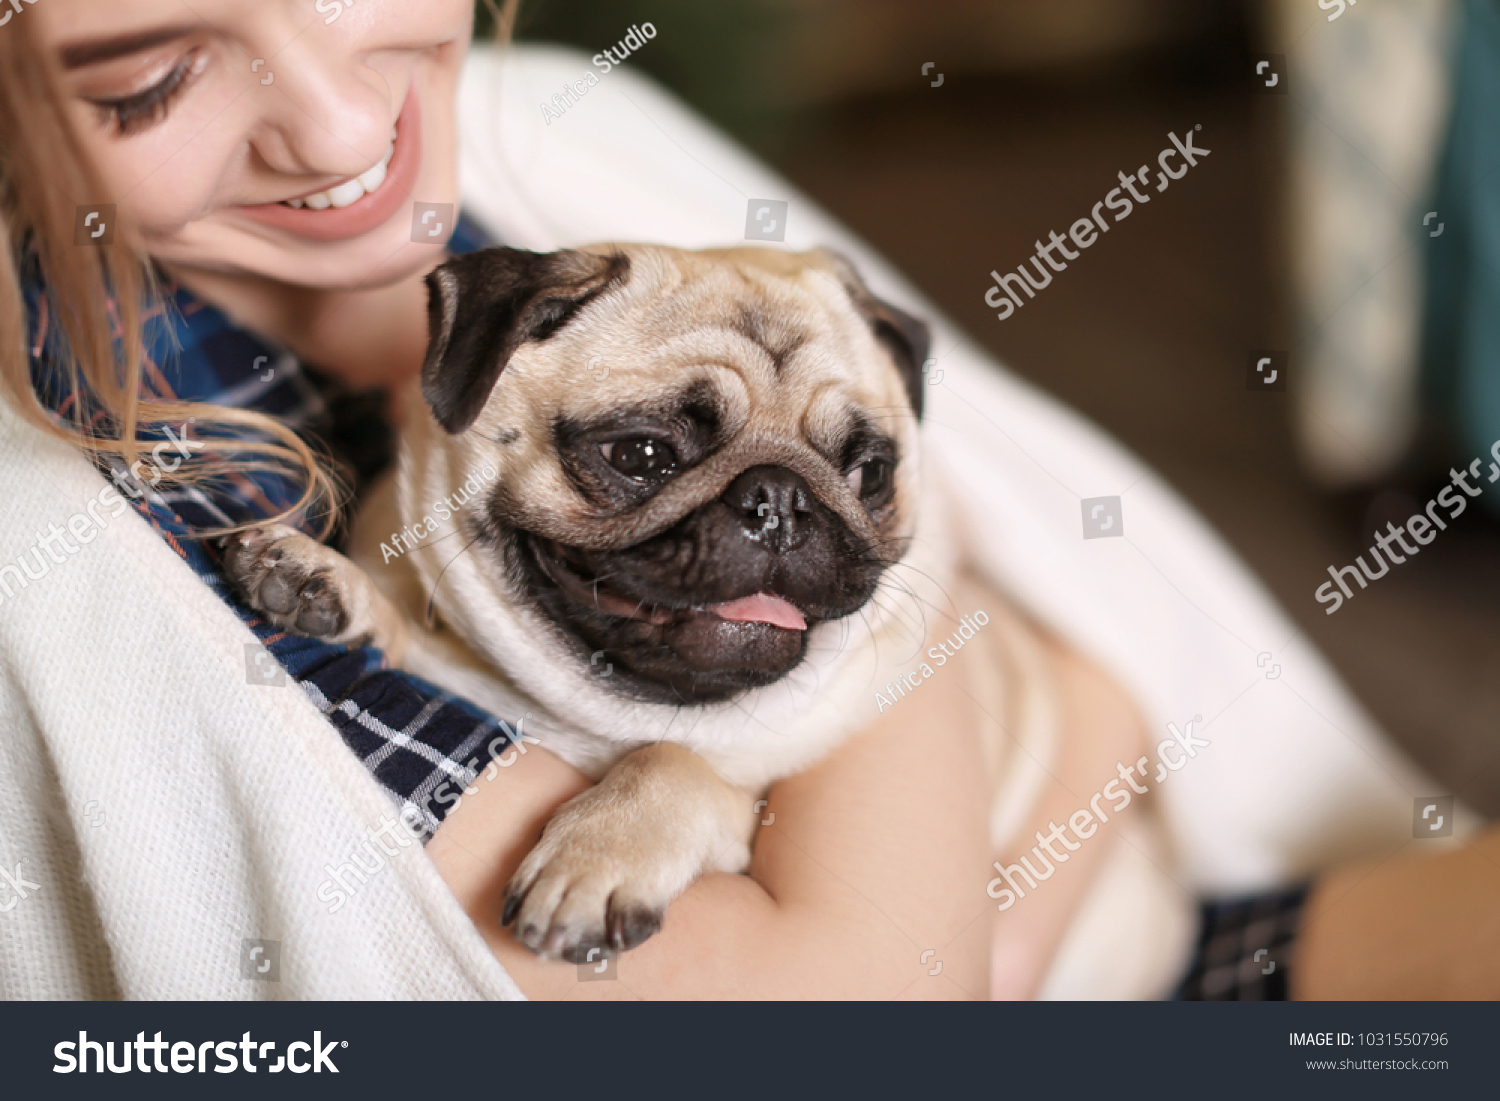 Young Woman Cute Pug Dog Home Stock Photo Edit Now 1031550796